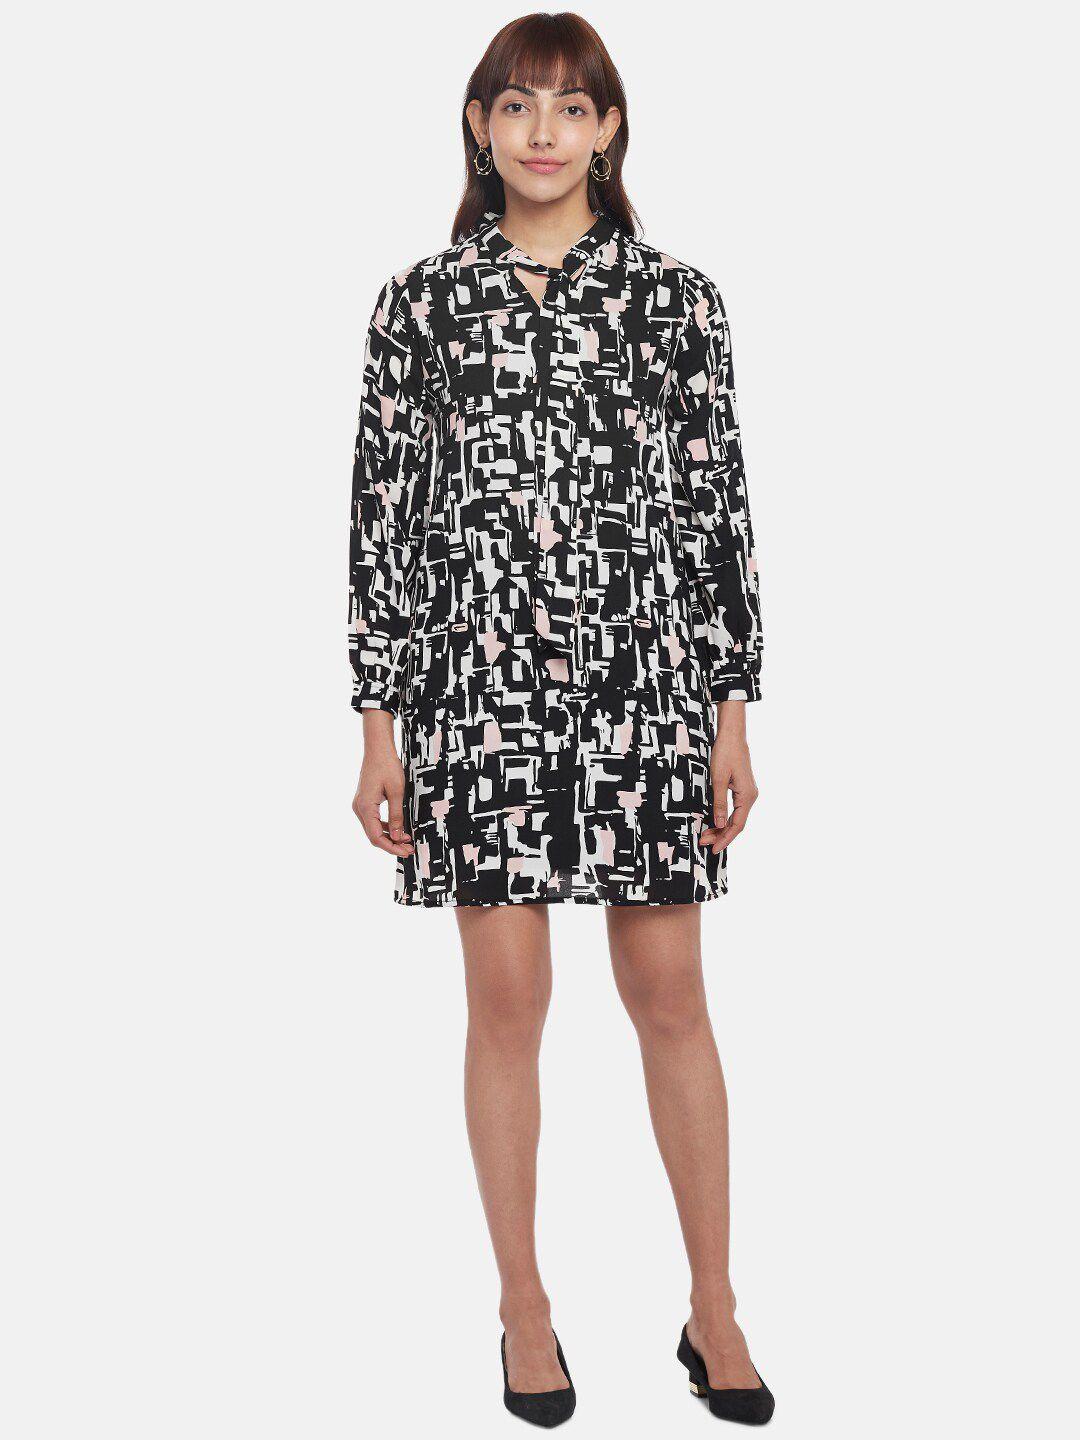 annabelle by pantaloons printed black tie-up neck shirt dress